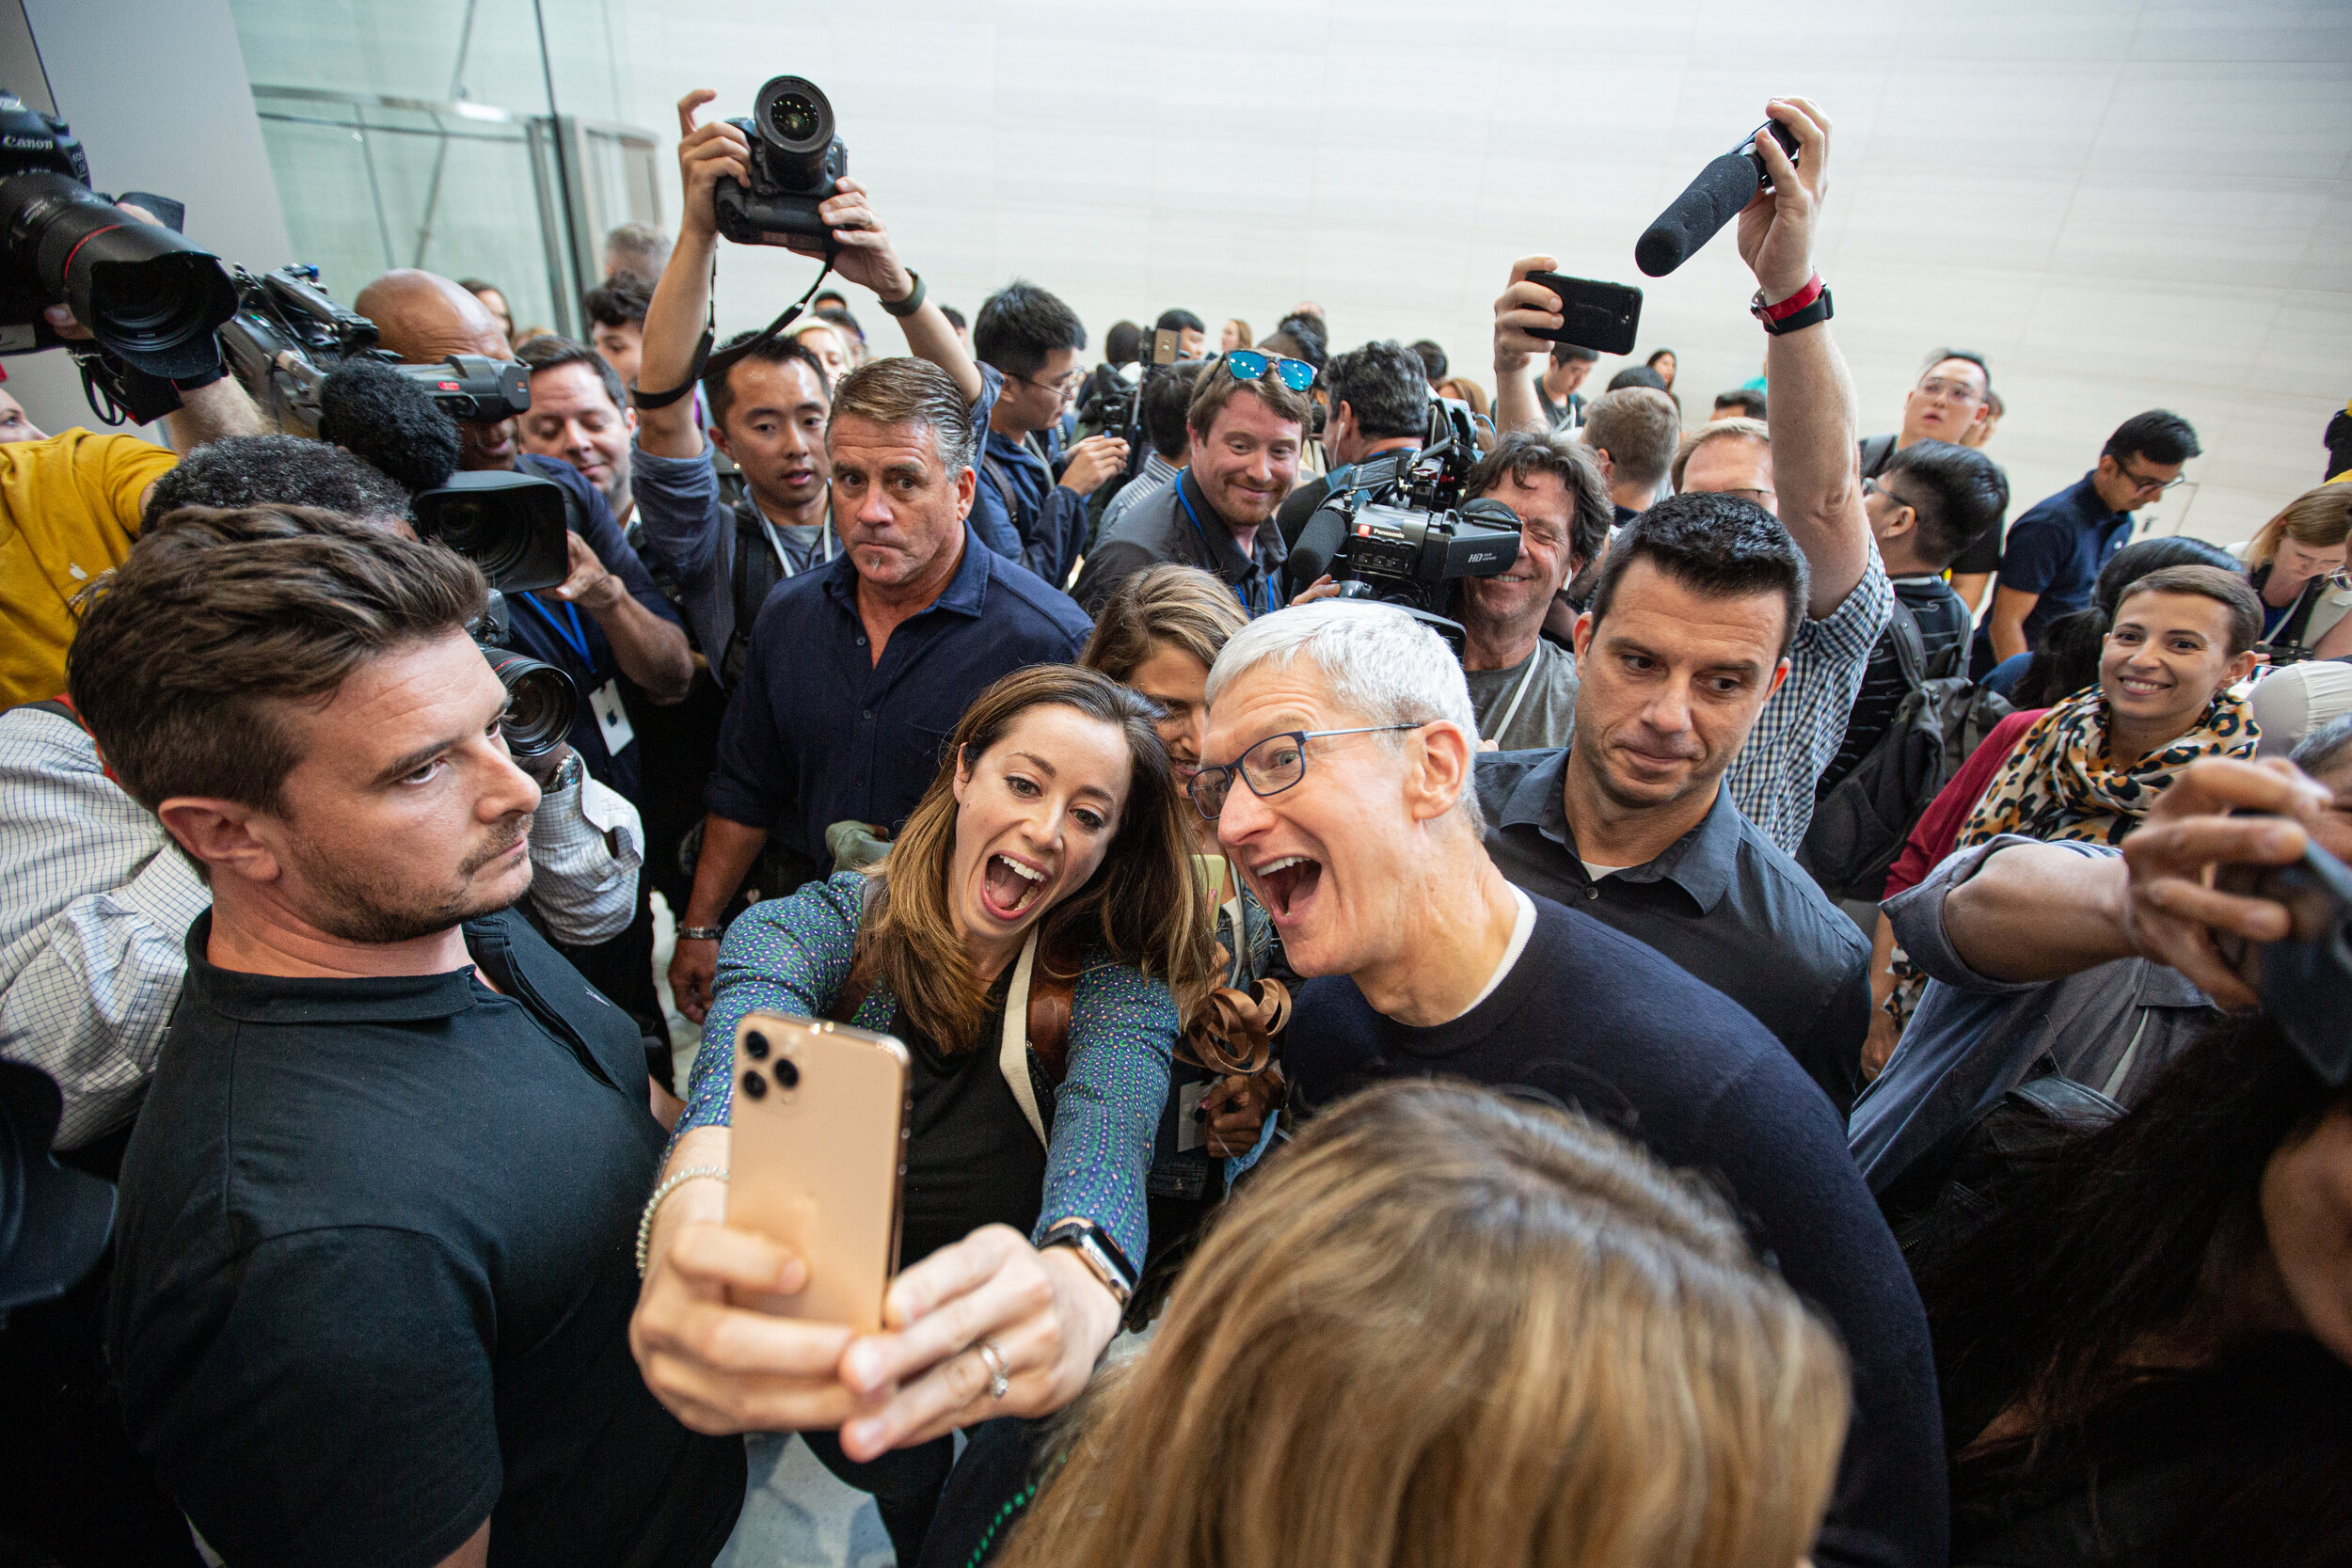  Tim Cook joins the croud at apples 2019 product launch event at its Coupertino heasdquarters. 